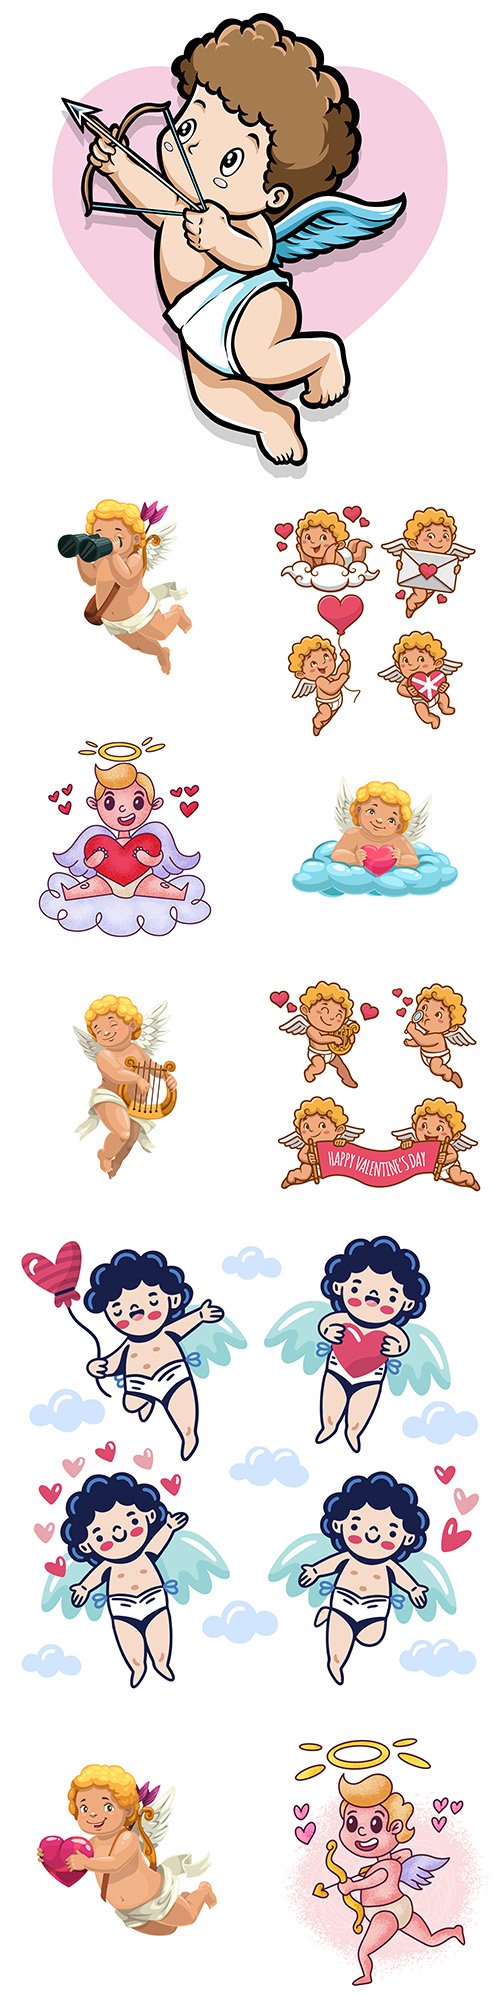 Romantic cupid with arrows and bow cartoon illustration